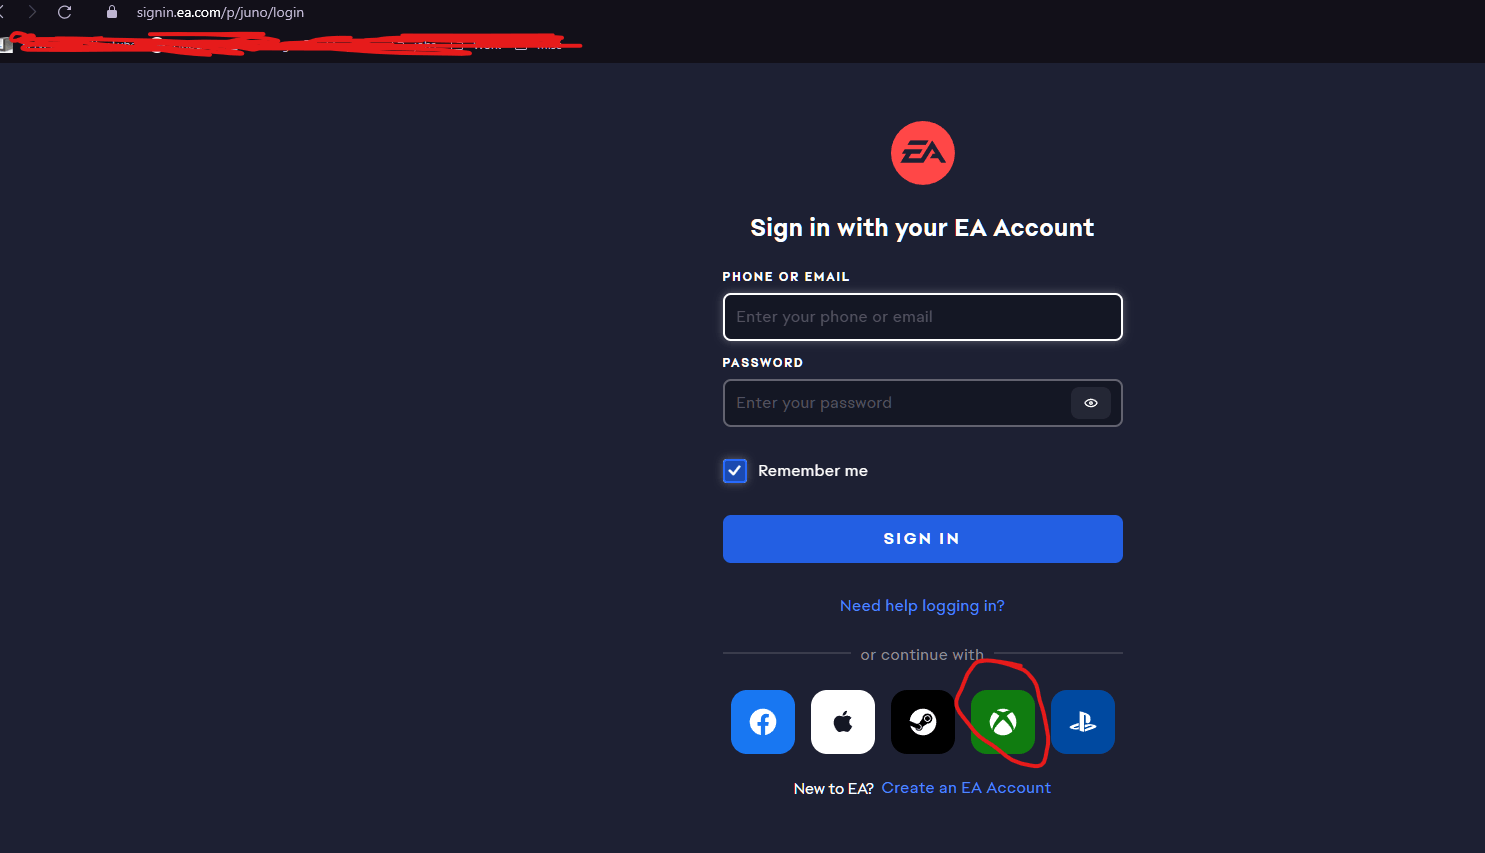 I can't log in to my EA Account